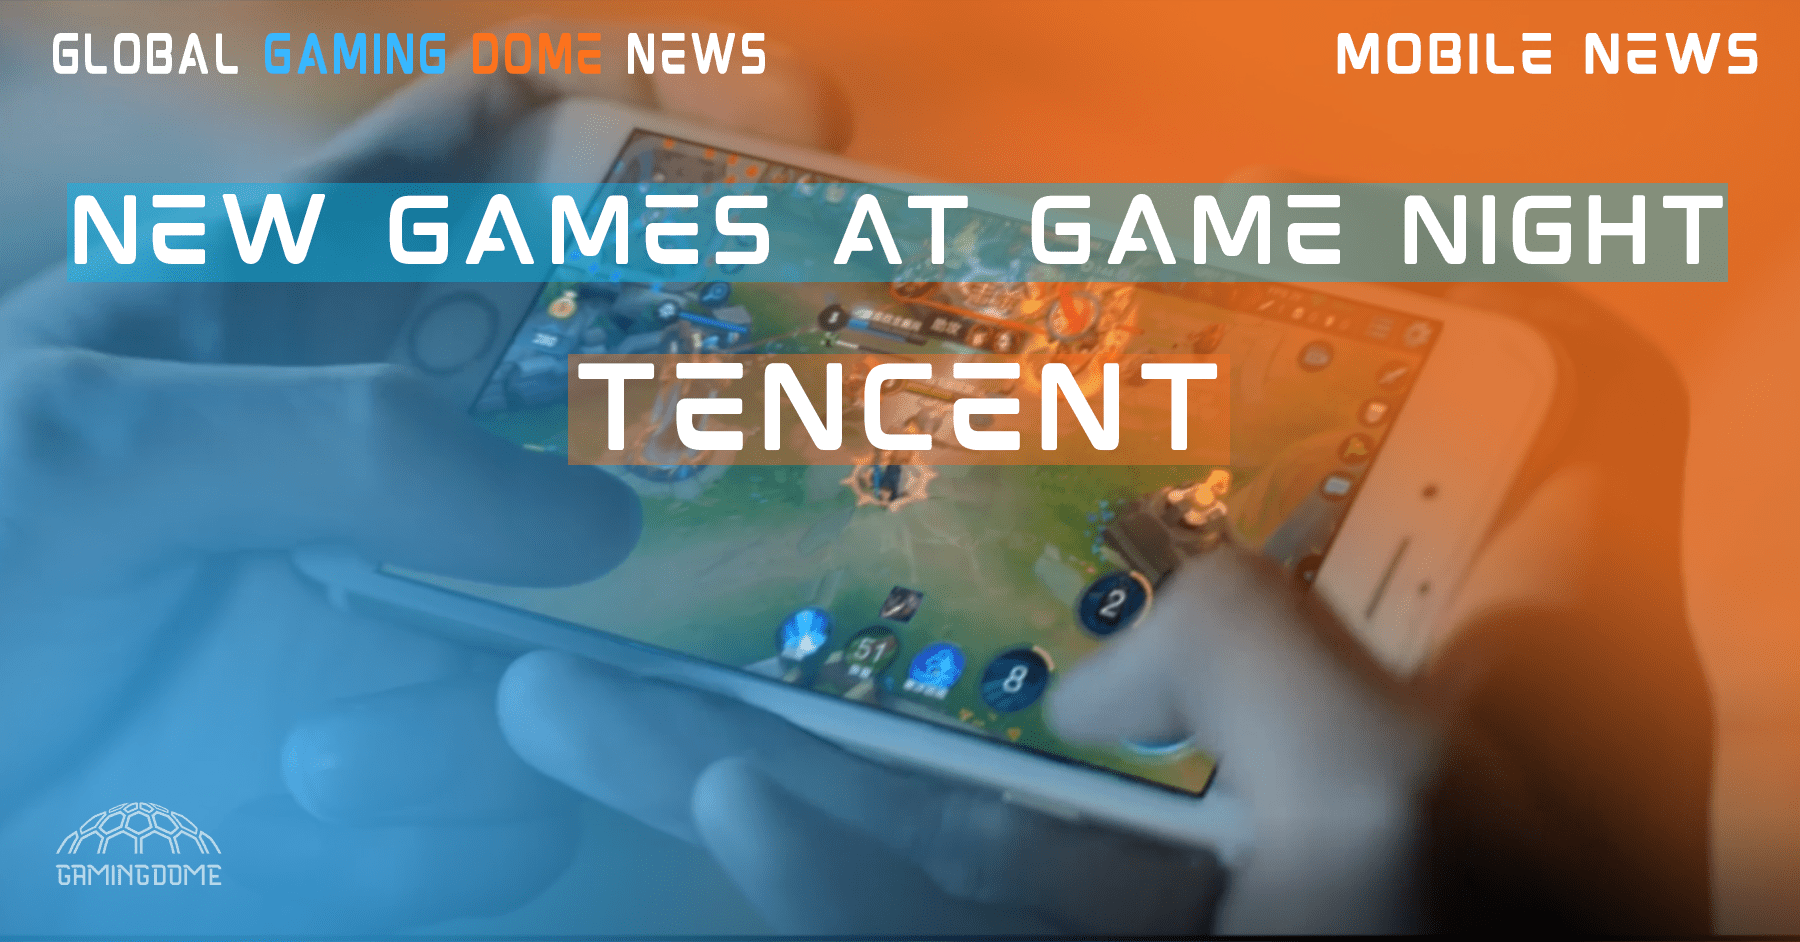 TENCENT TO ANNOUNCE NEW GAMES AT GAME NIGHT